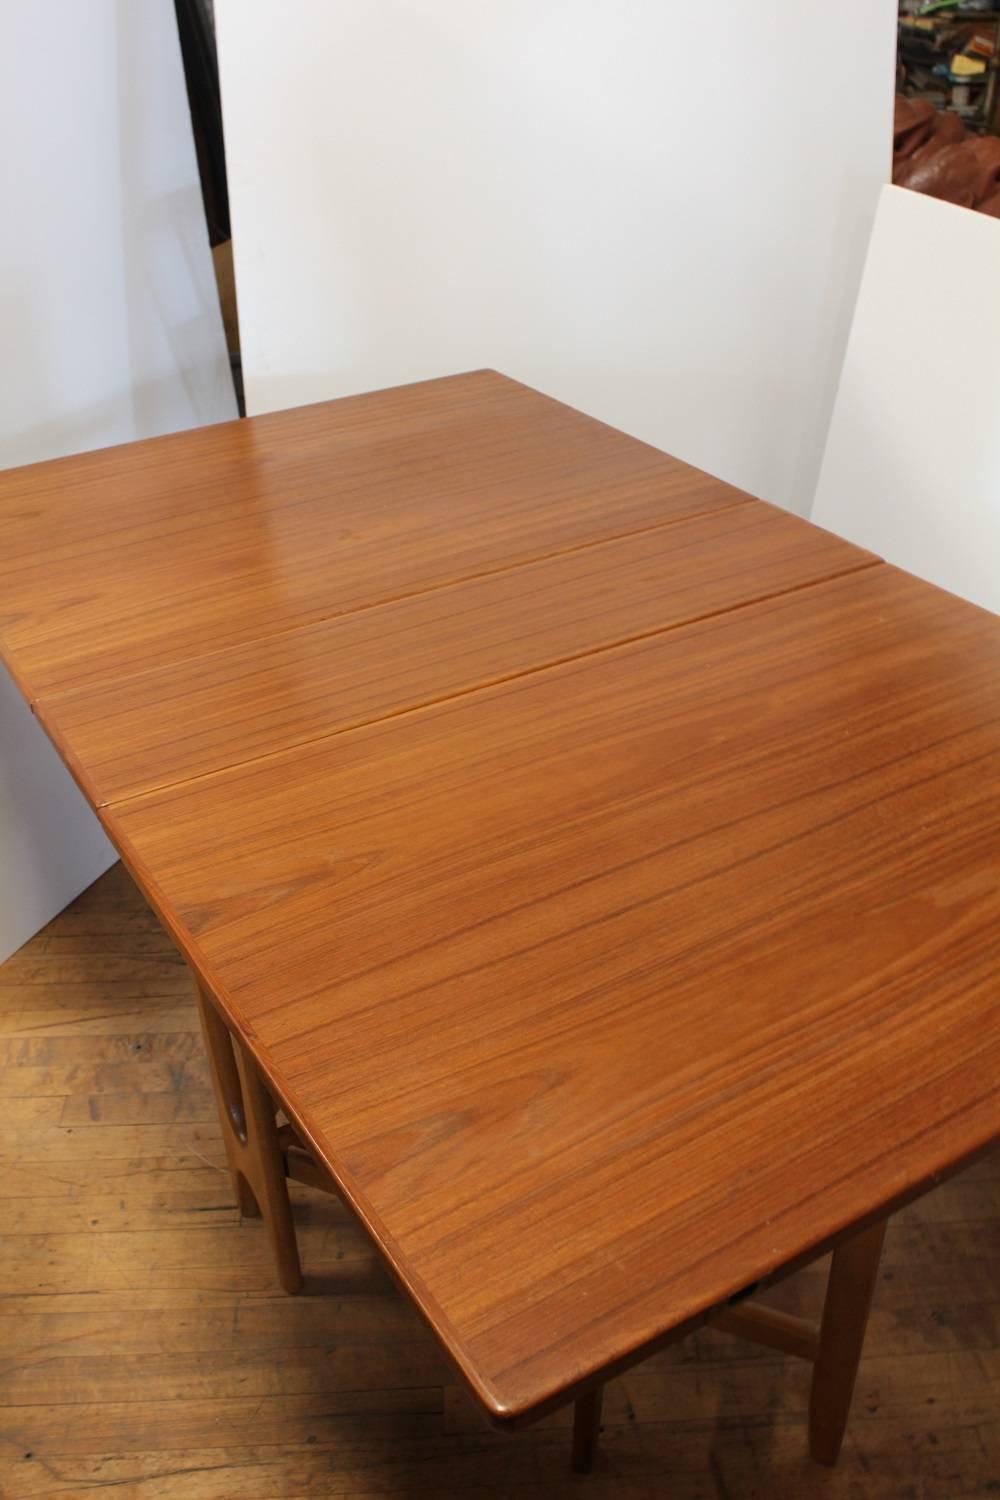 Midcentury gateleg folding dining table. Dimensions: leaves folded down: 13.5?W x 35?D x 29?H, both leaves extended: 64?W x 35?D x 29?H.